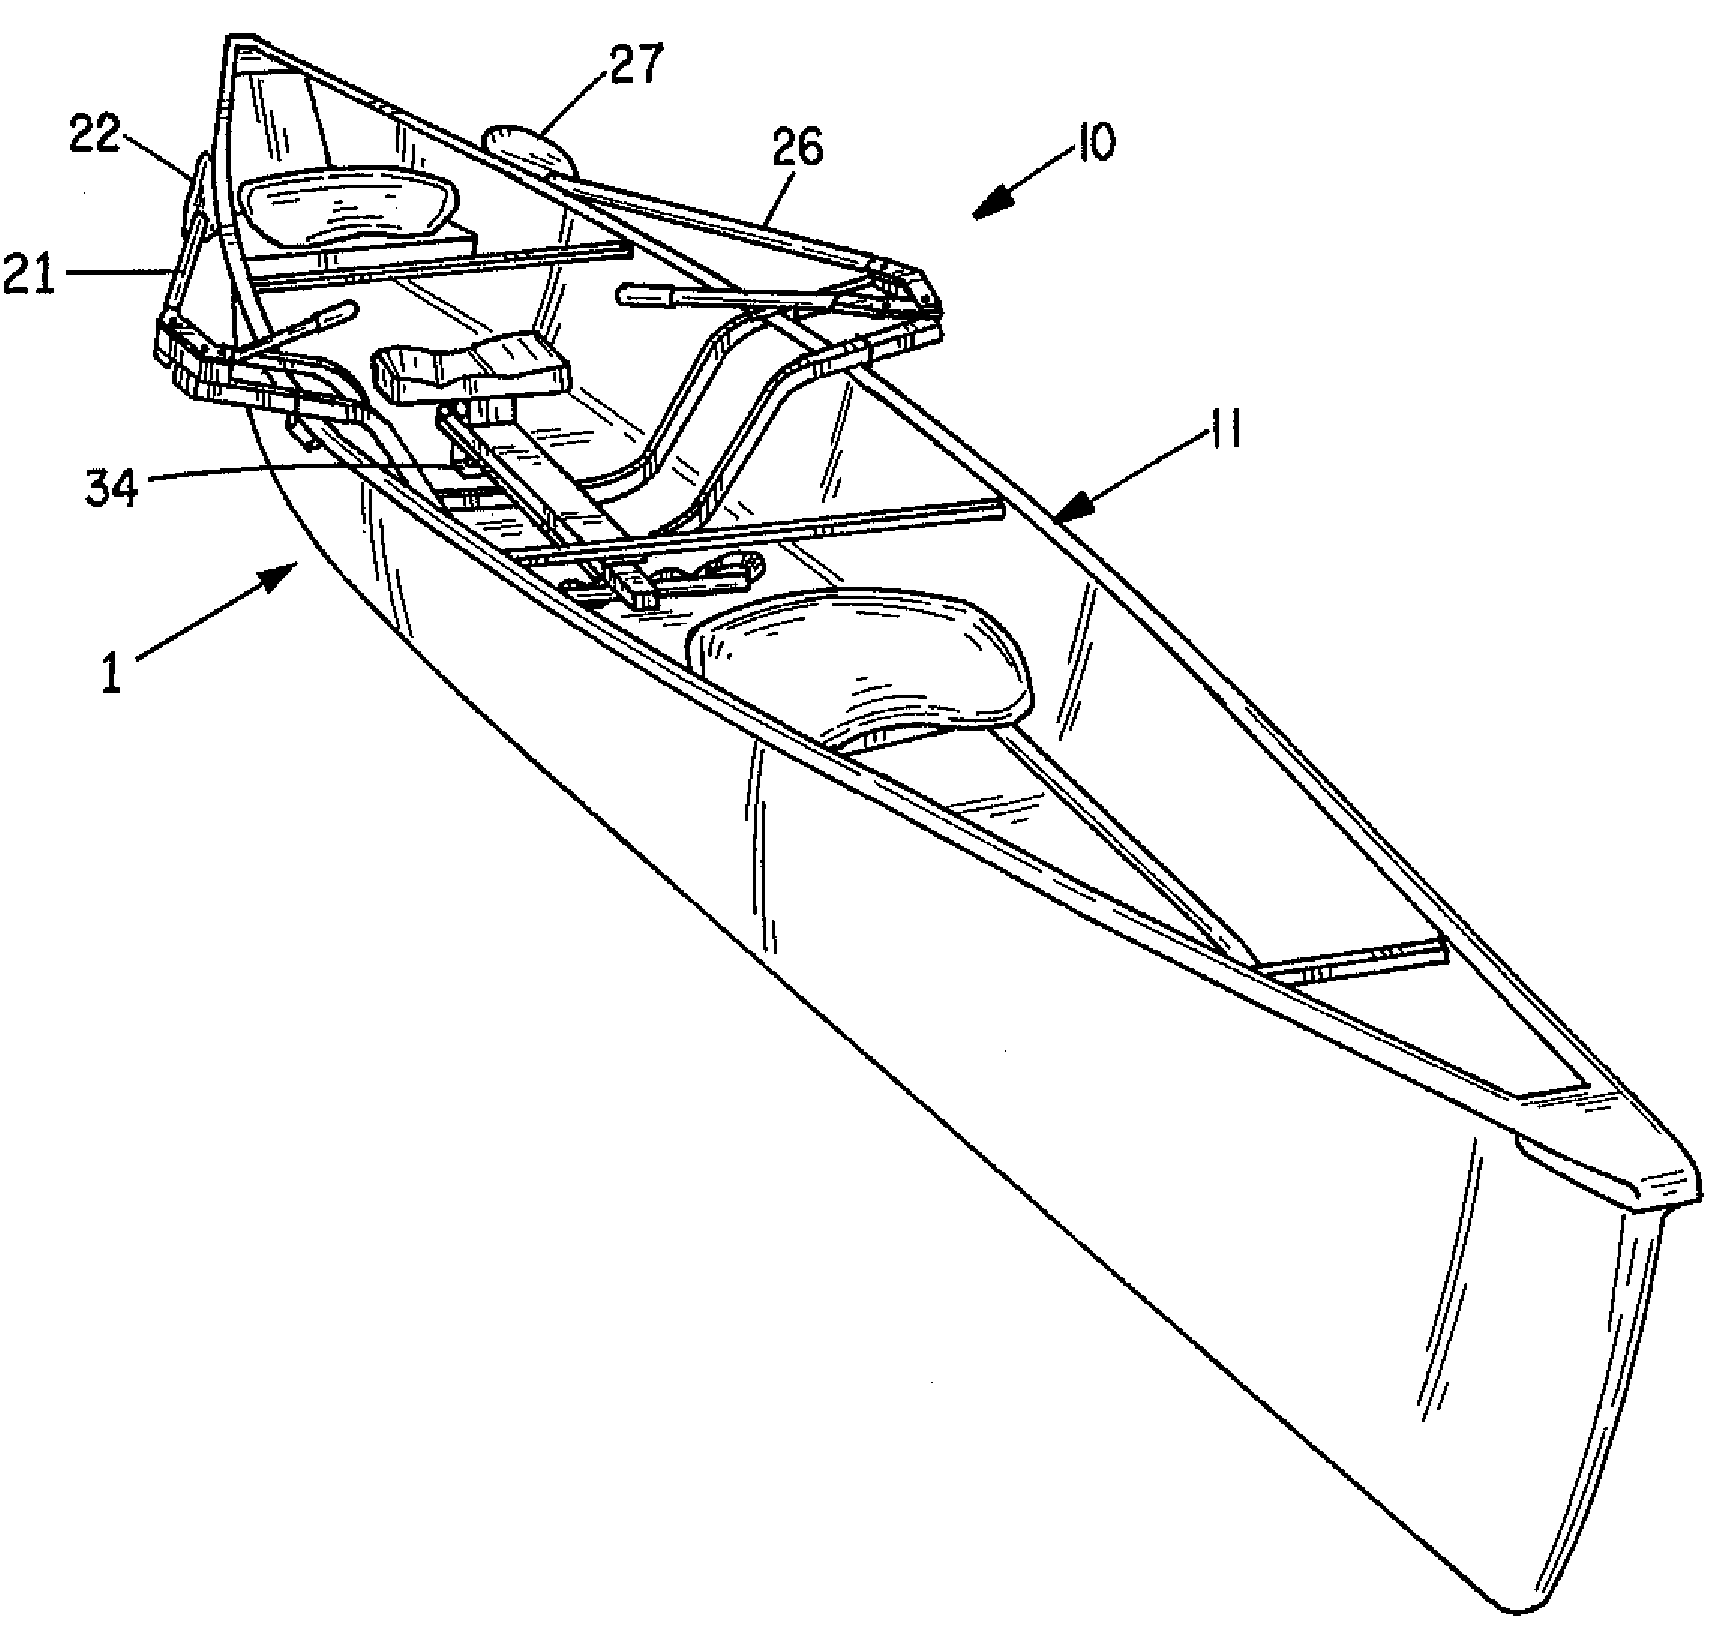 Forward facing rowing attachment with rolling seat